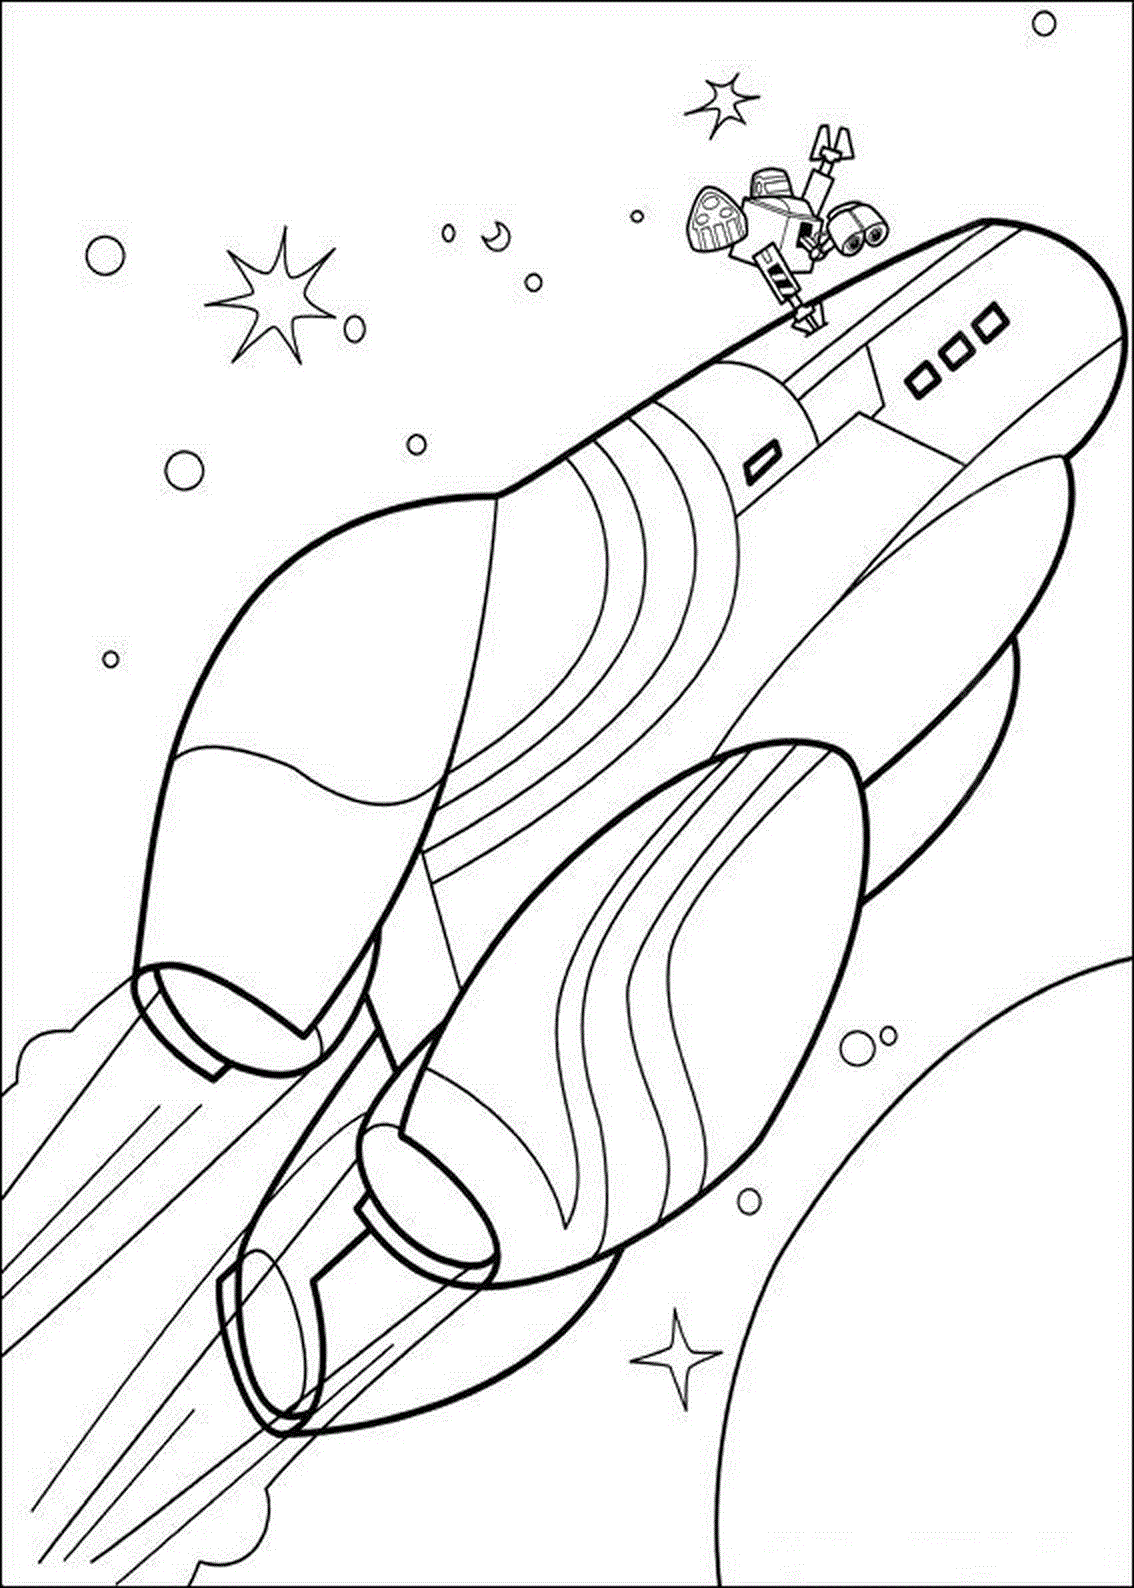 Wall E Kleurplaten Raket Coloring Pages Wall E Coloring Pages For Kids